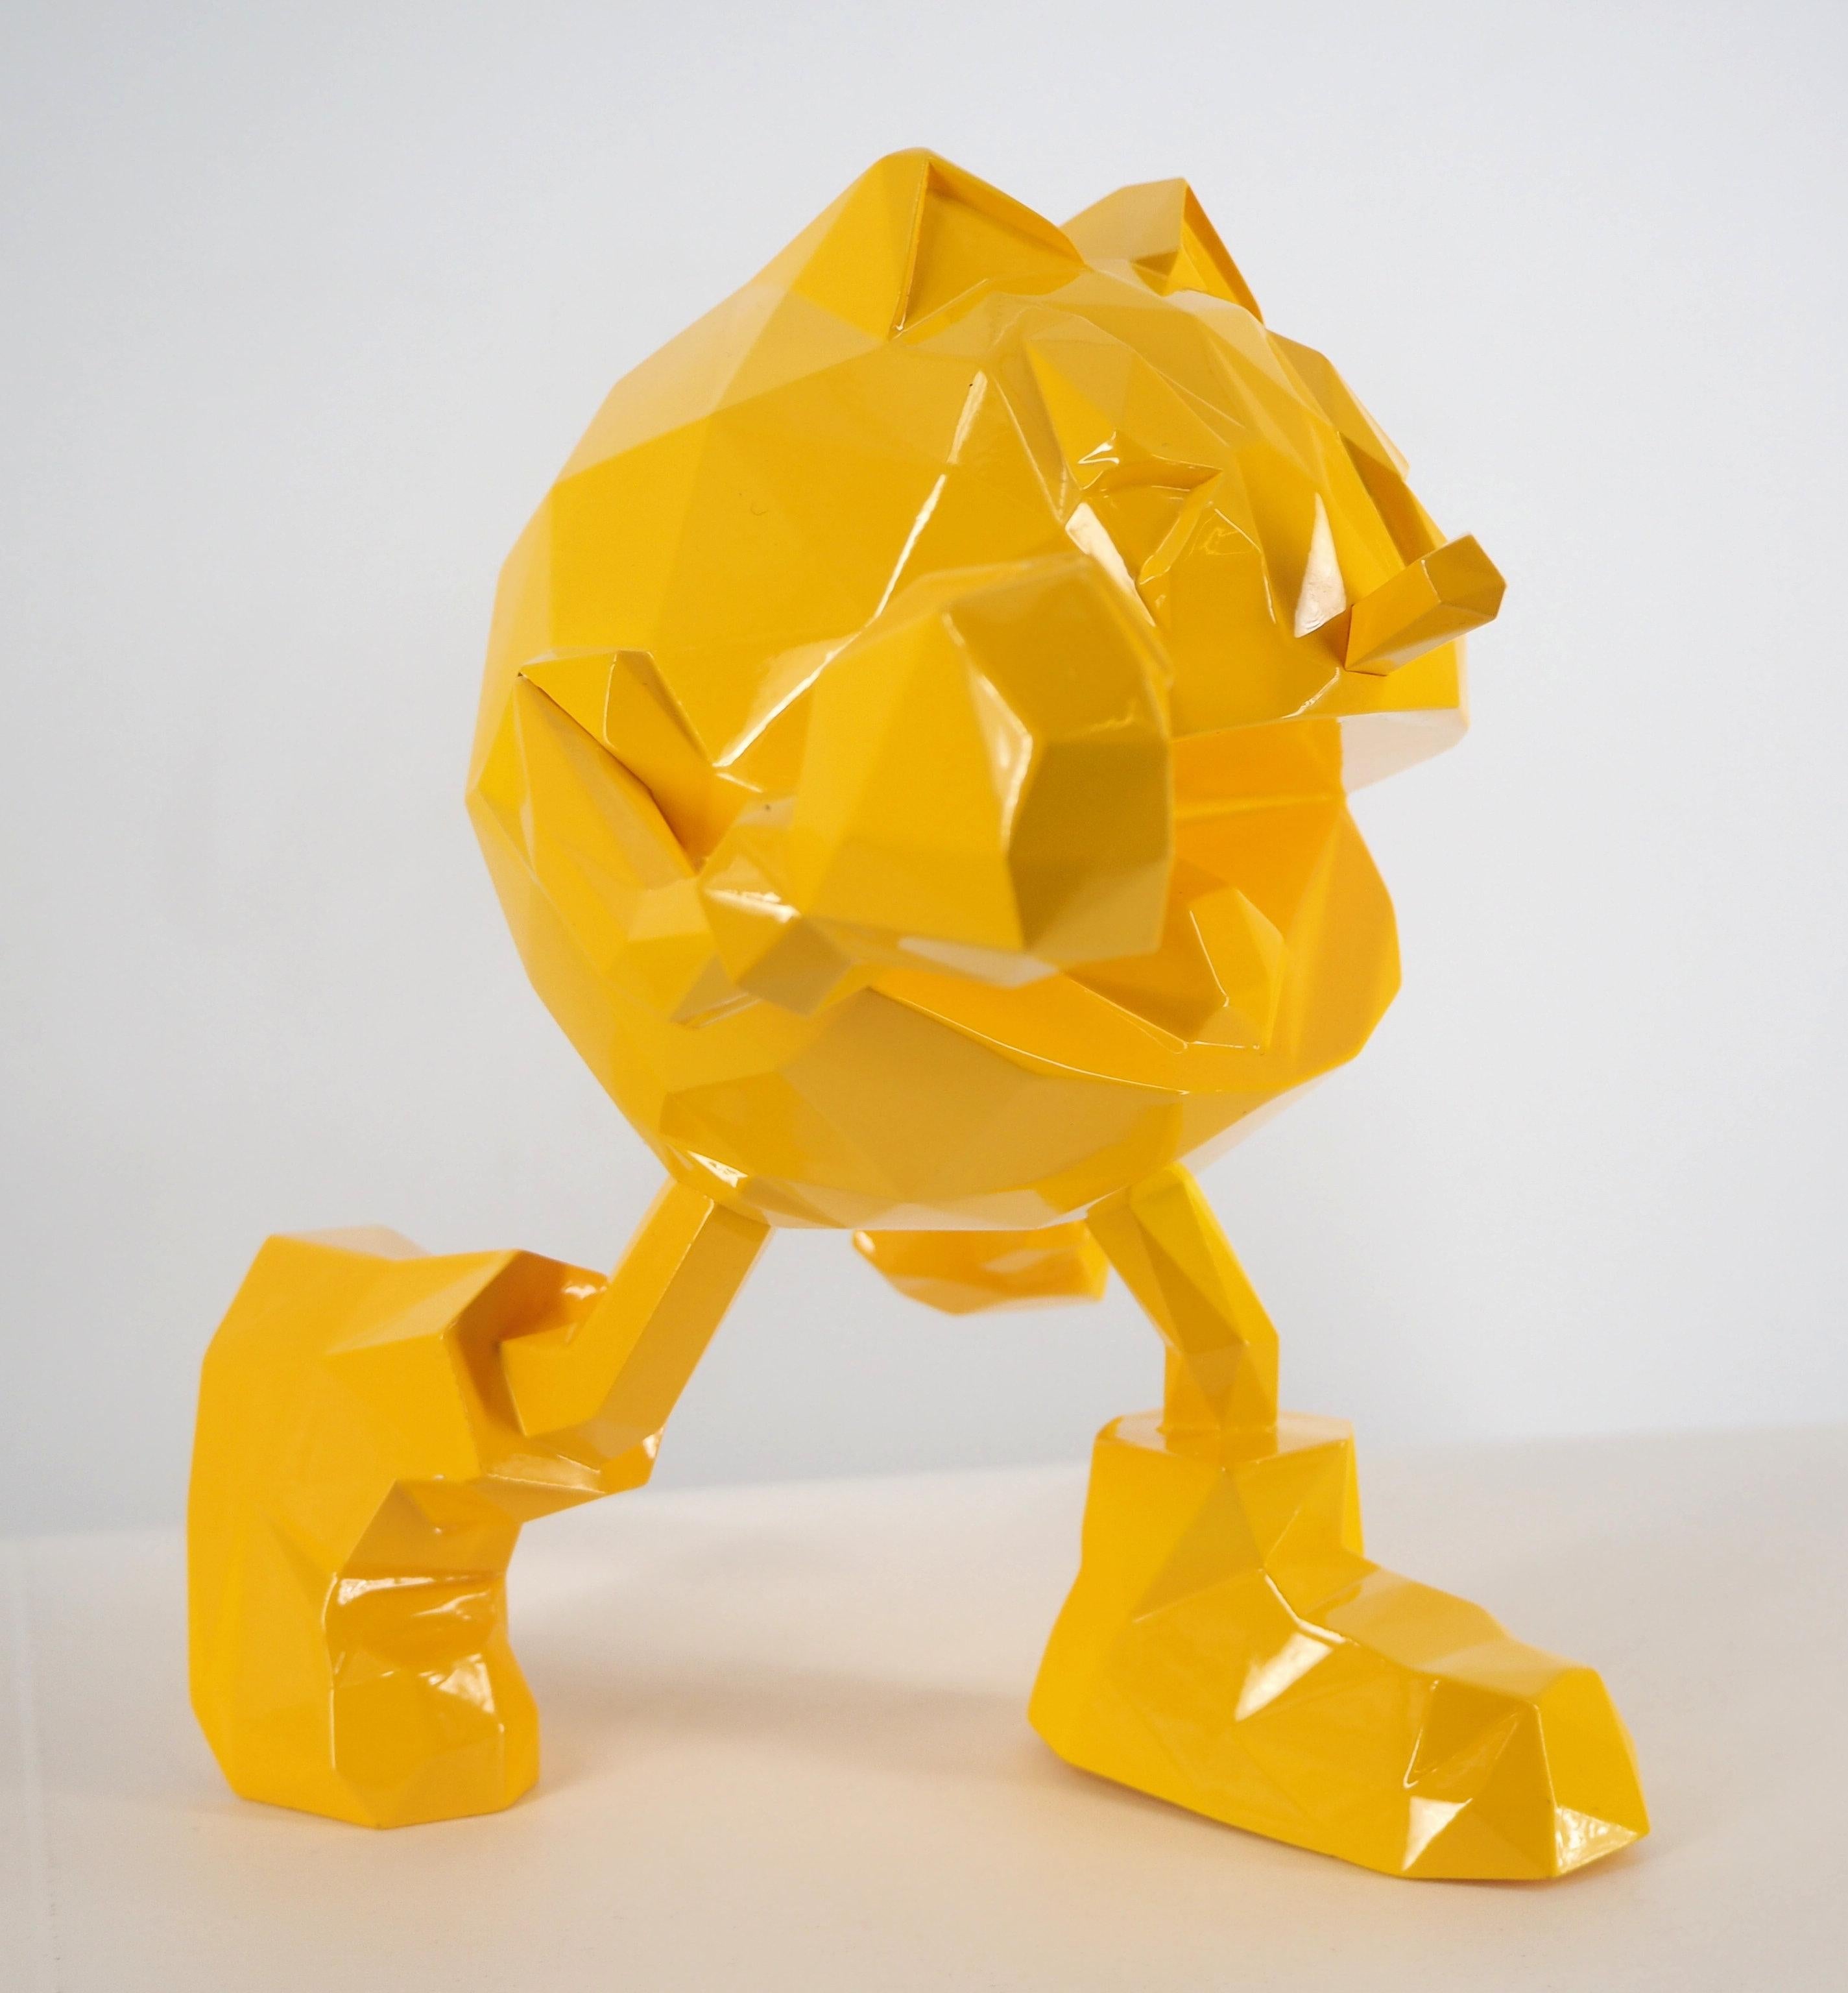 Richard ORLINSKI
Pac Man (Yellow edition)

Sculpture in resin
Metallic Yellow
About 18 cm (c. 7 in)
Presented in original box

Excellent condition